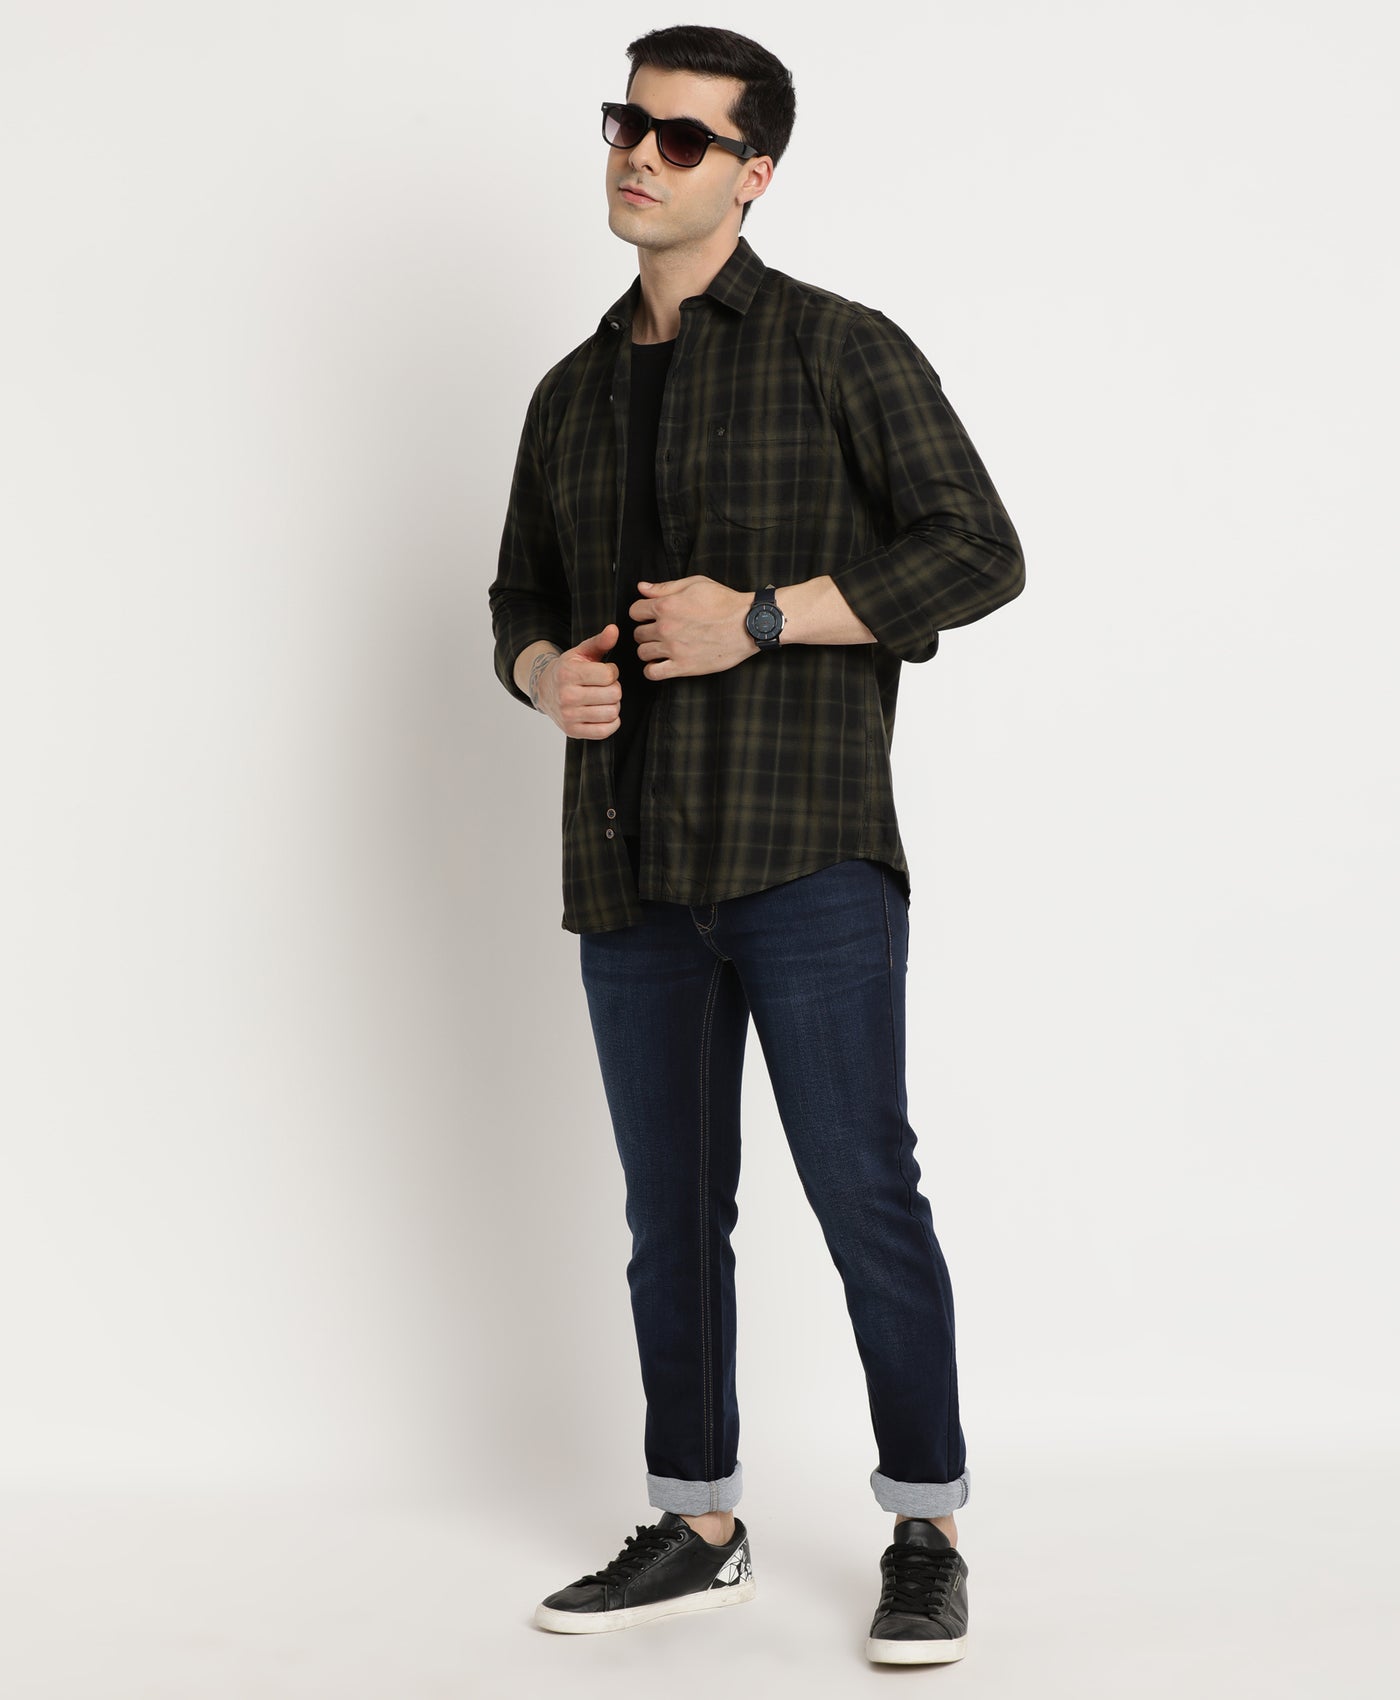 100% Cotton Olive Checkered Slim Fit Full Sleeve Casual Shirt